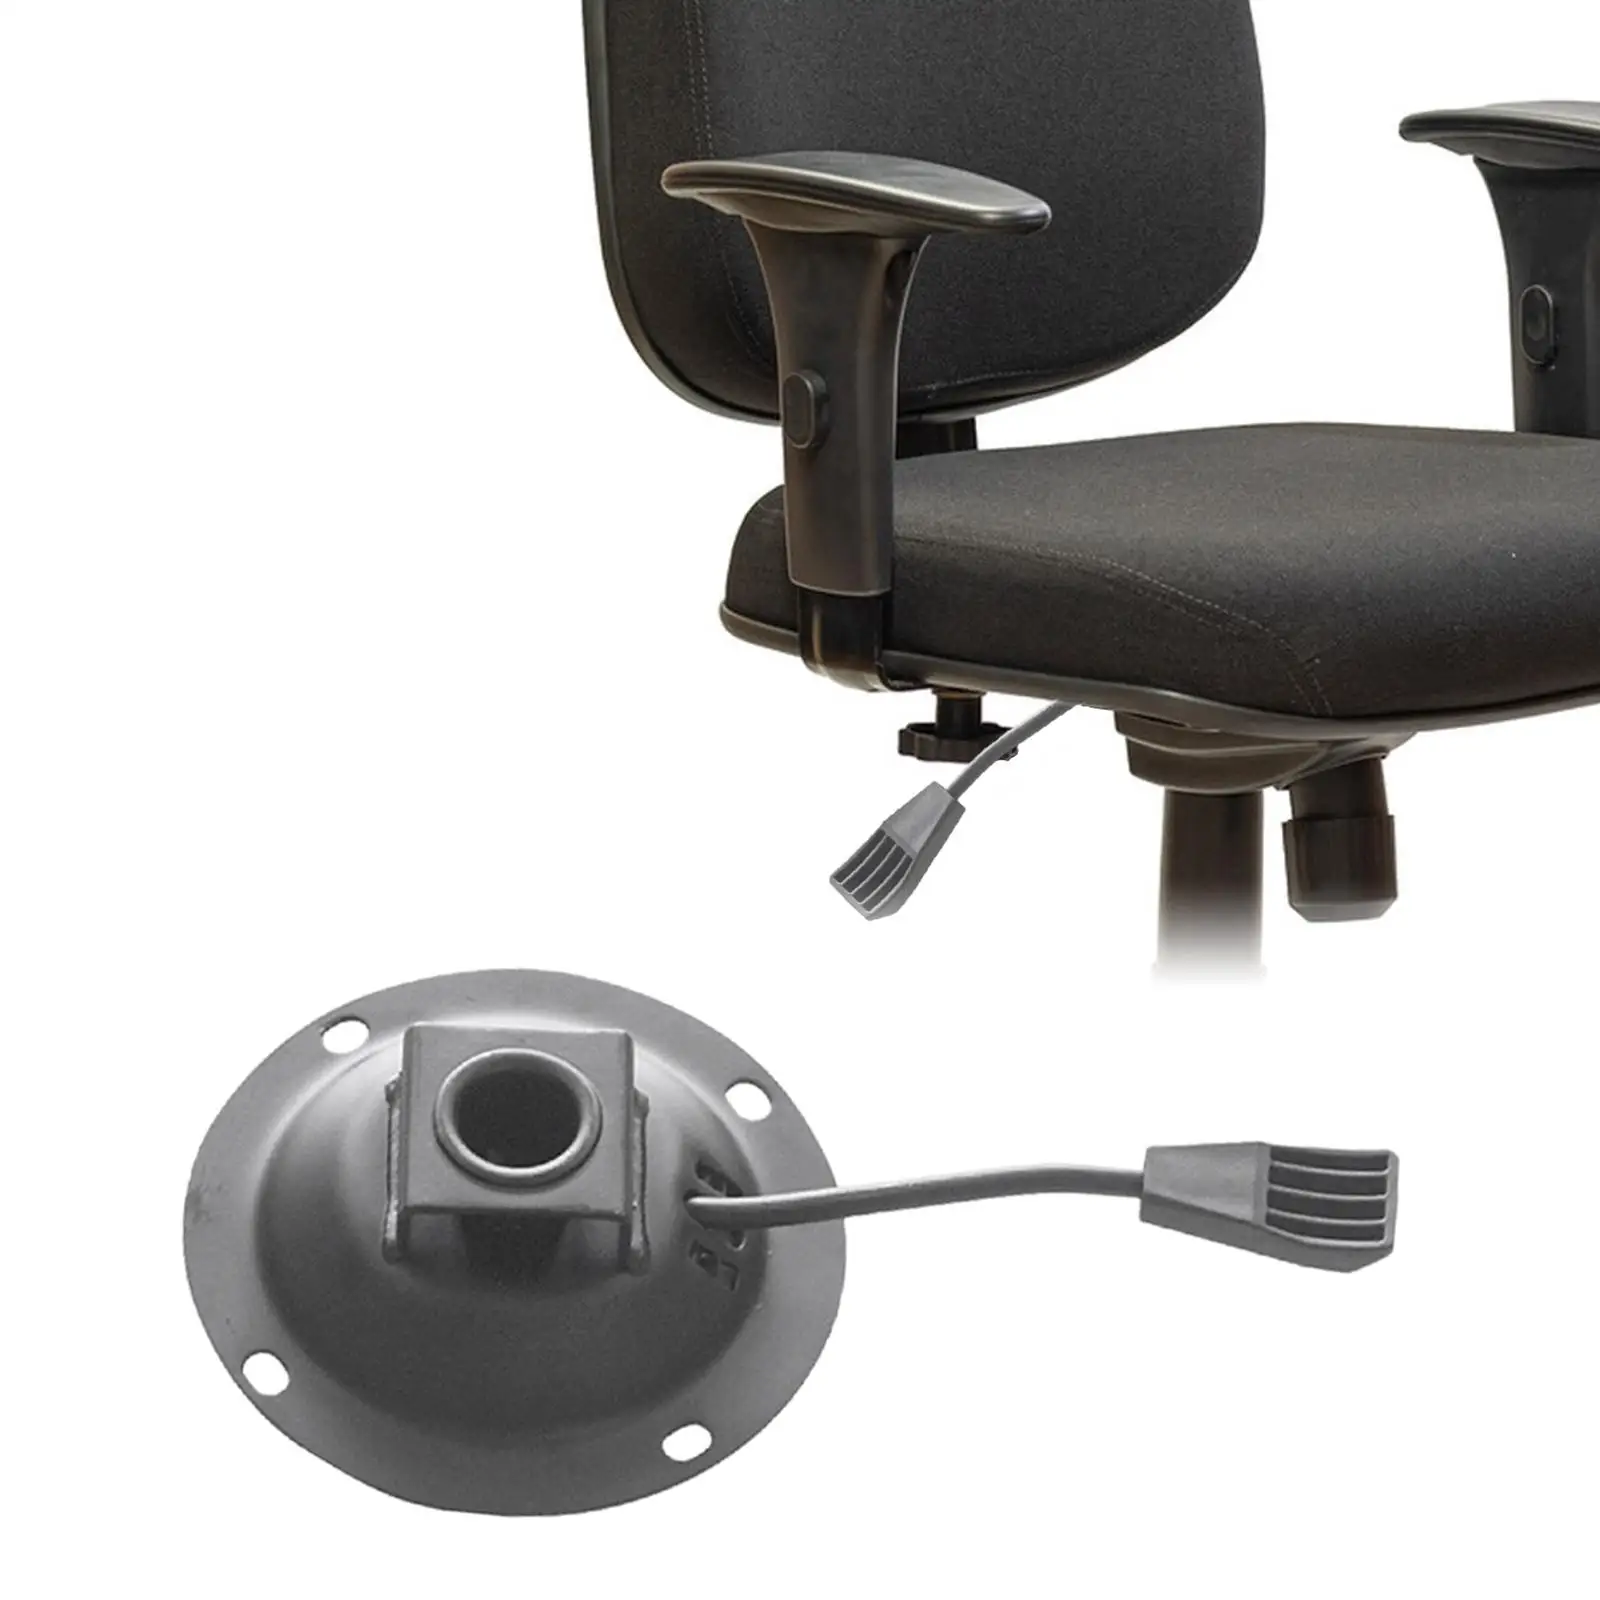 

Office Chair Swivel Tilt Control Seat Mechanism Home Lift Lever Handle for Executive Desk Living Room Gaming Chairs Game Room